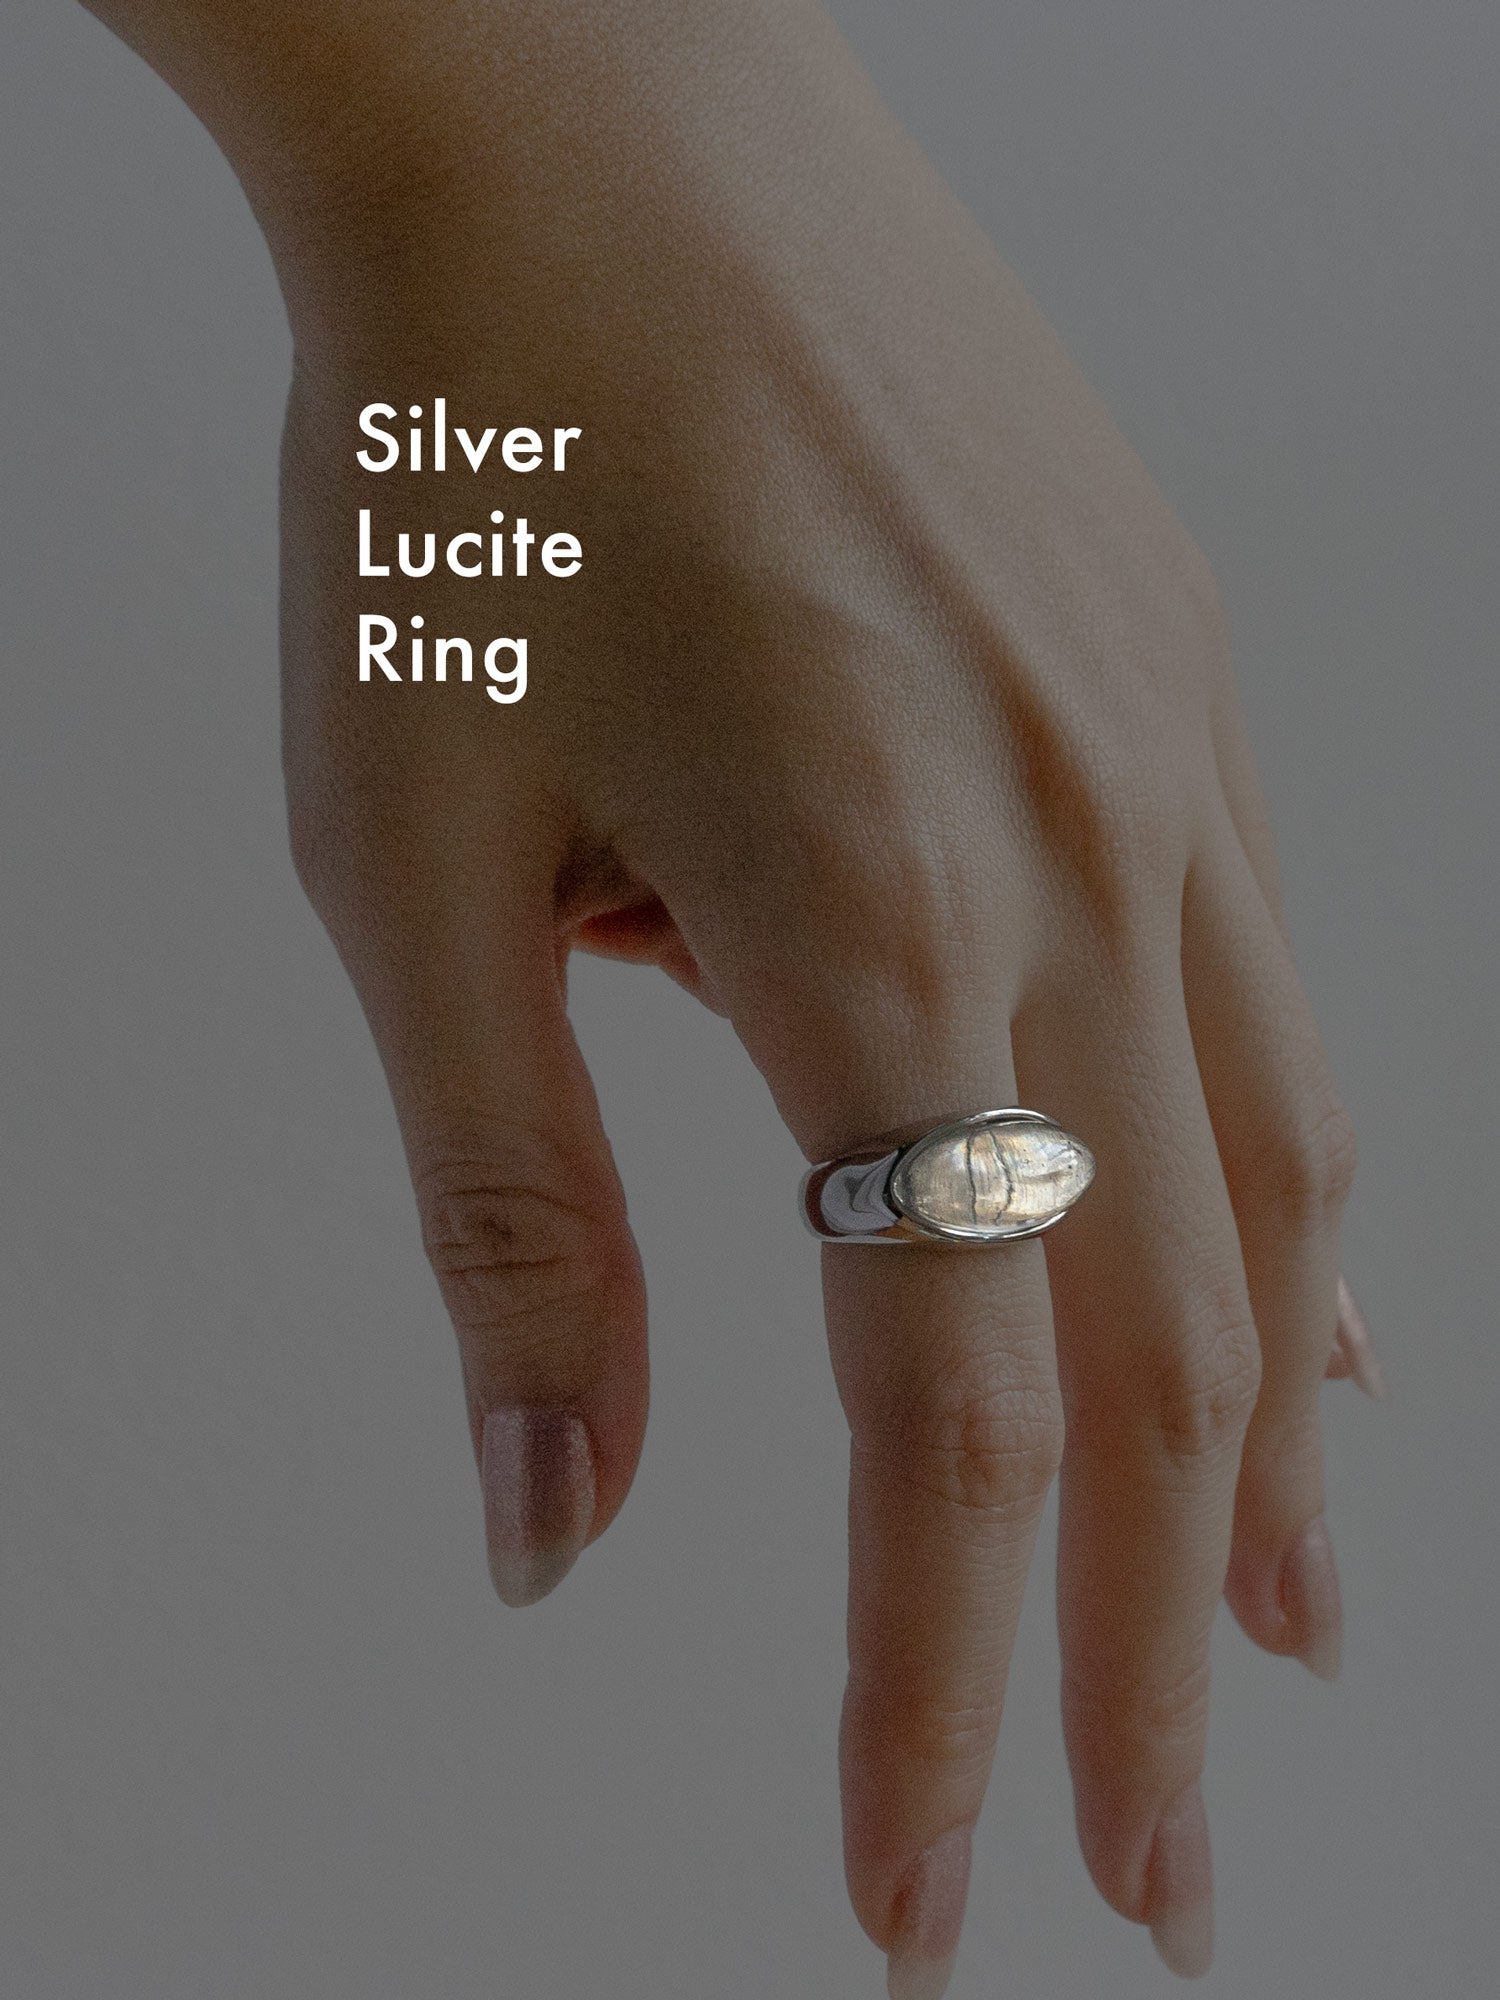 silver lucite ring text